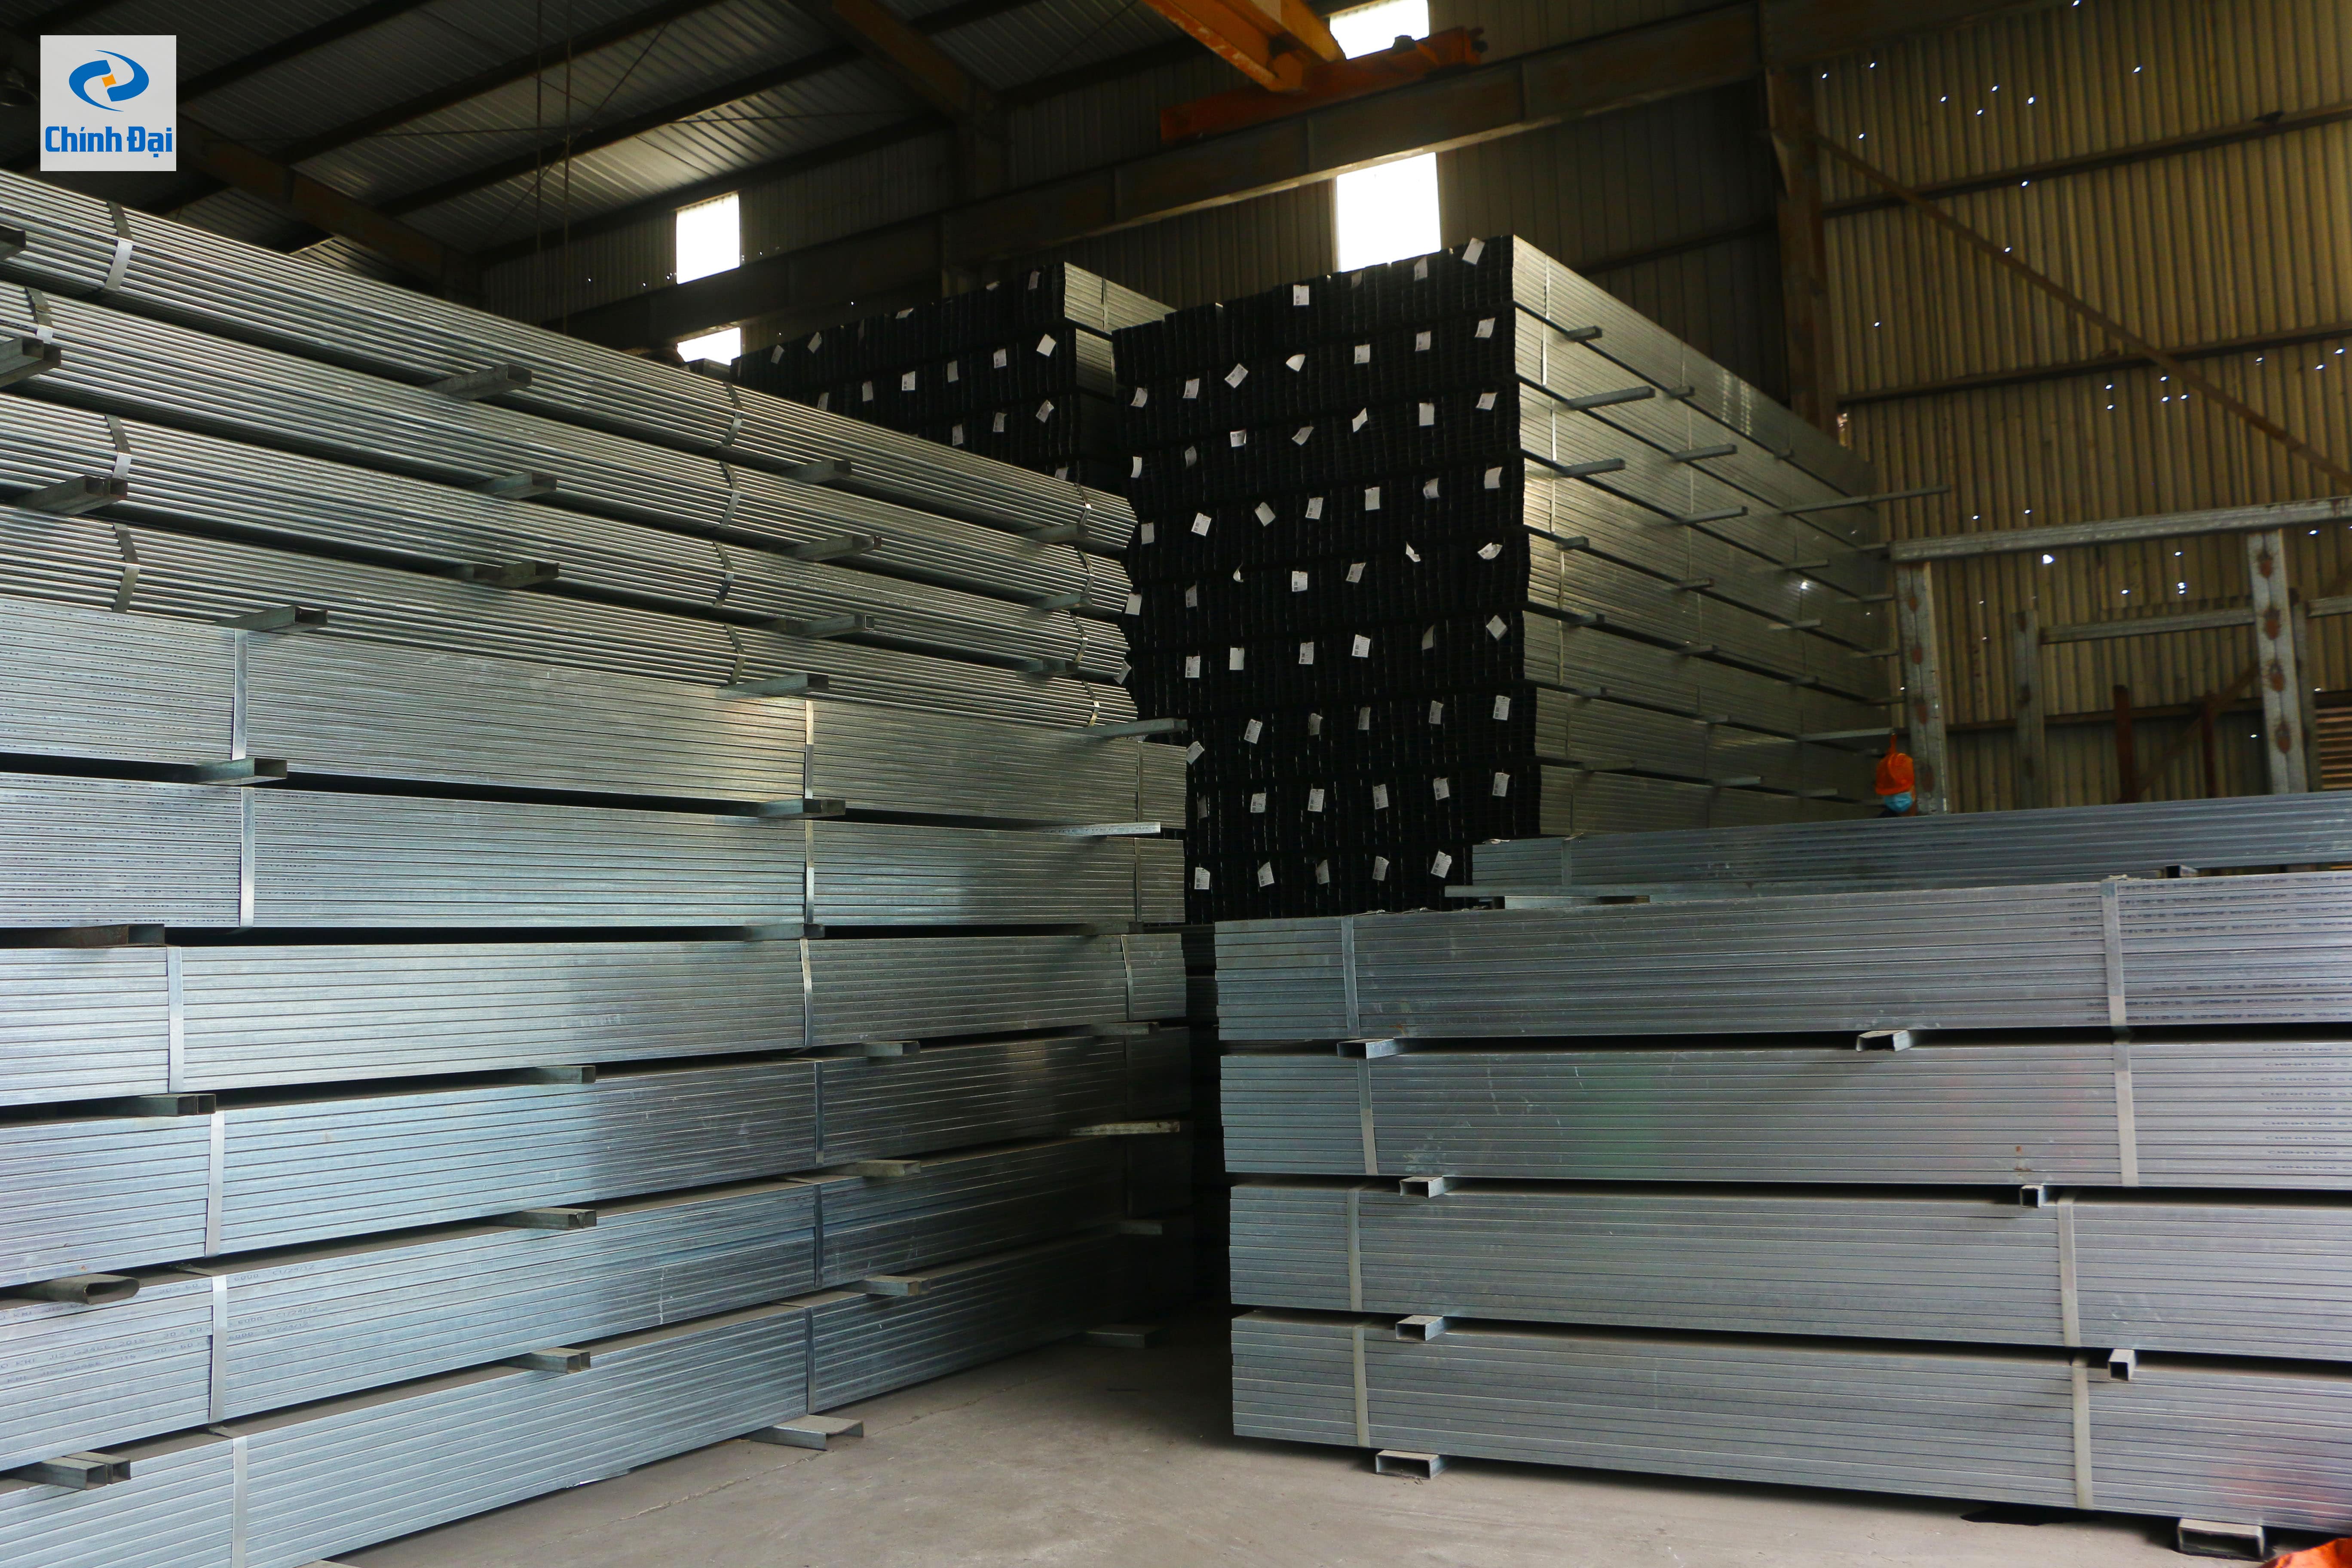 Chinh Dai Steel pipes